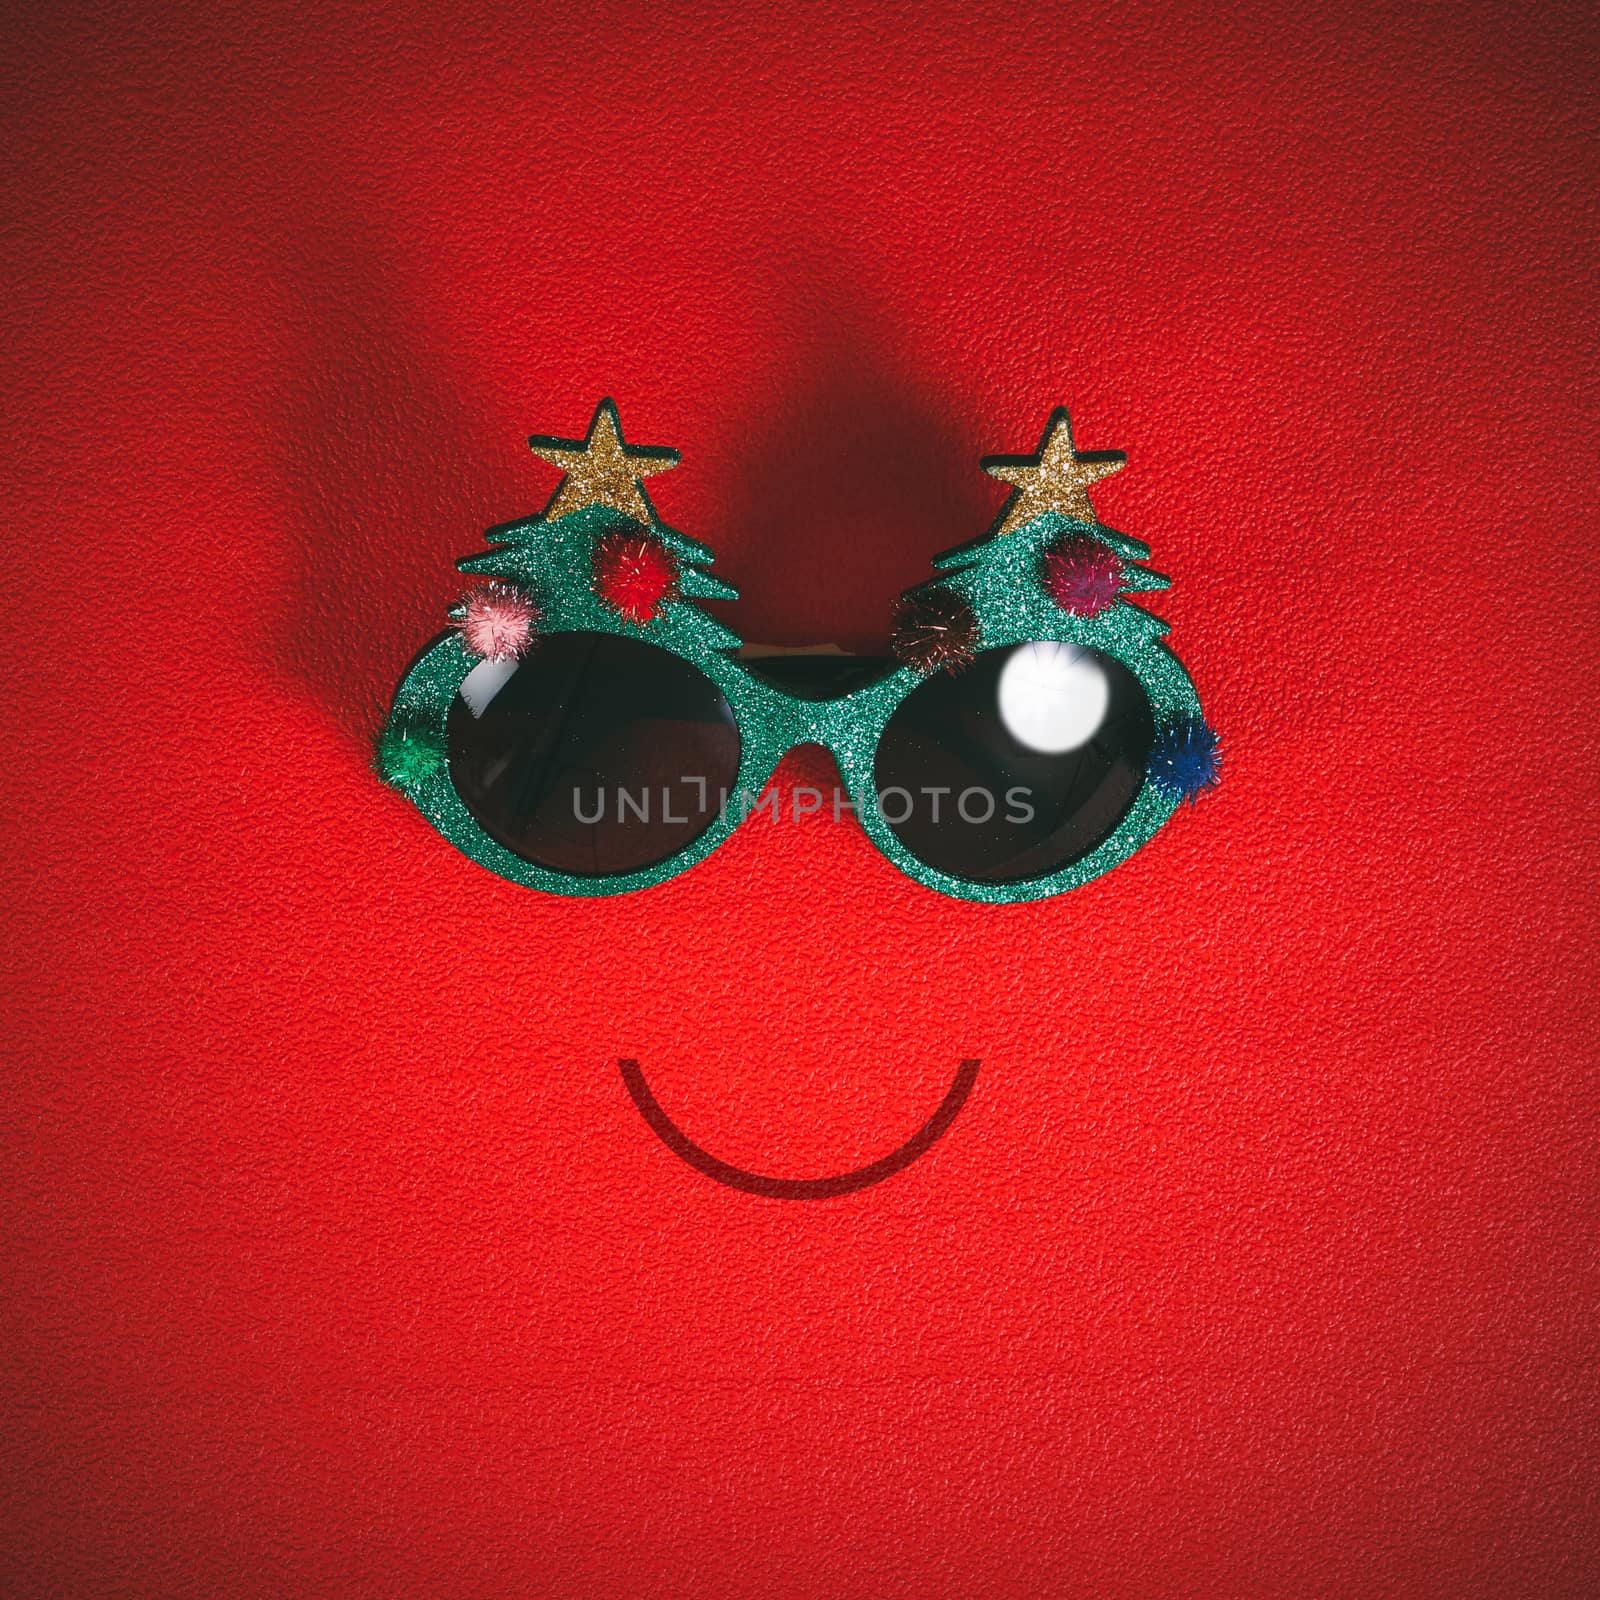 Christmas glasses that decoration with Christmas tree and red ball on red background